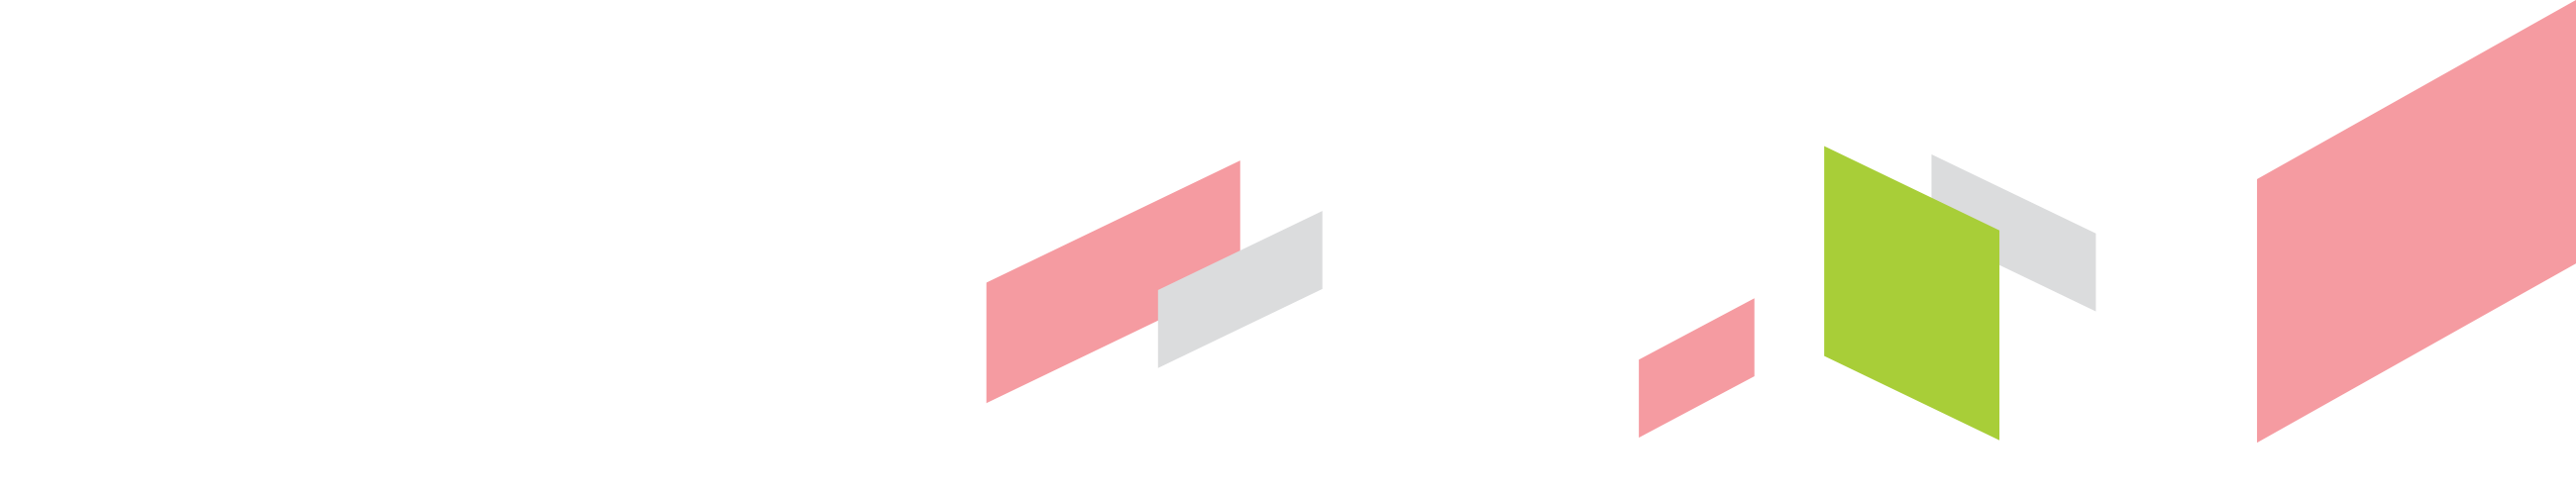 Pink, grey, and green angled rectangles